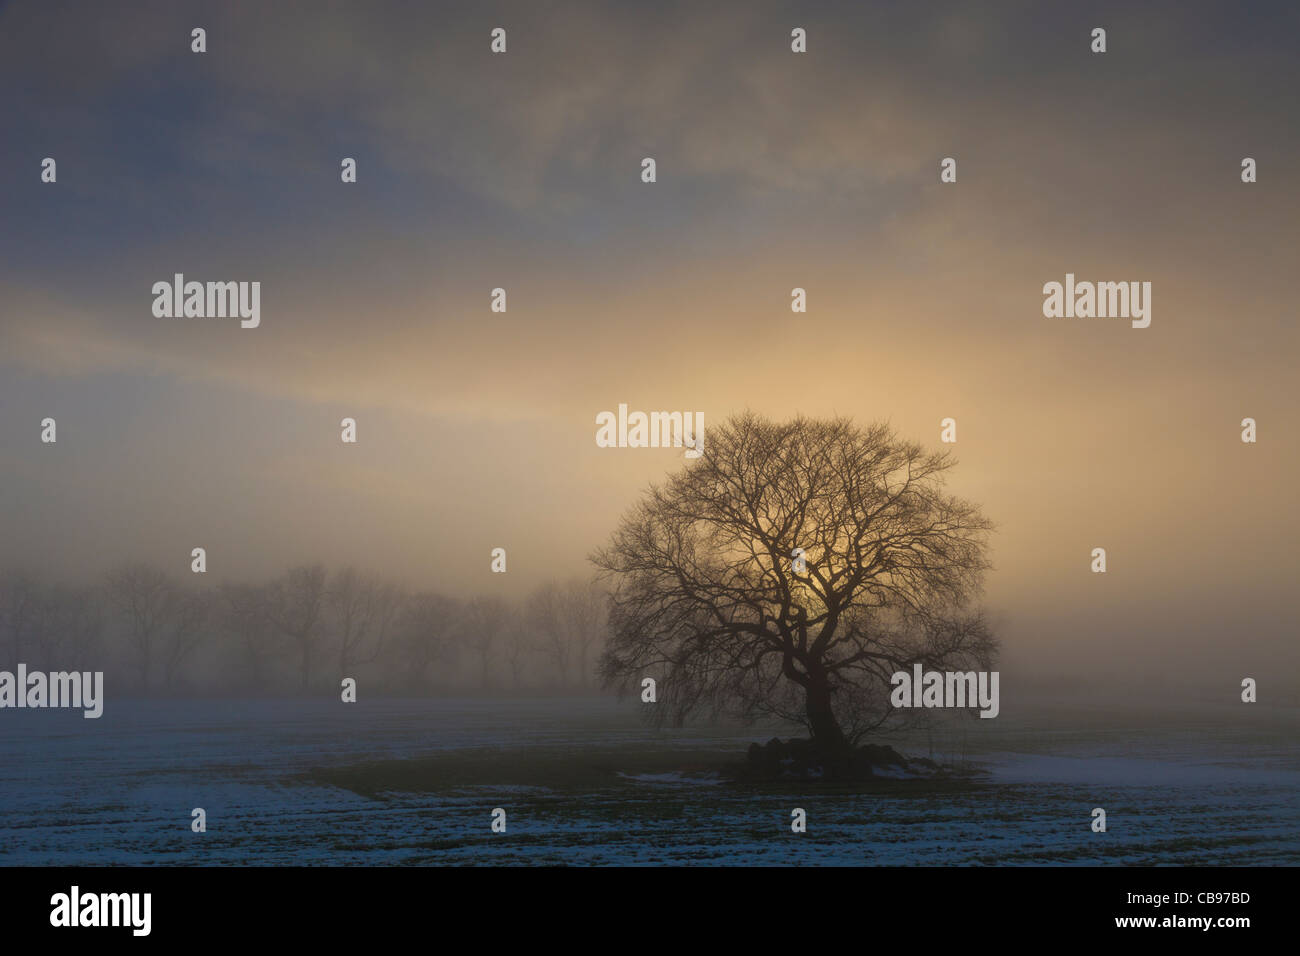 A lone tree in a foggy field, backlit by the setting sun Stock Photo